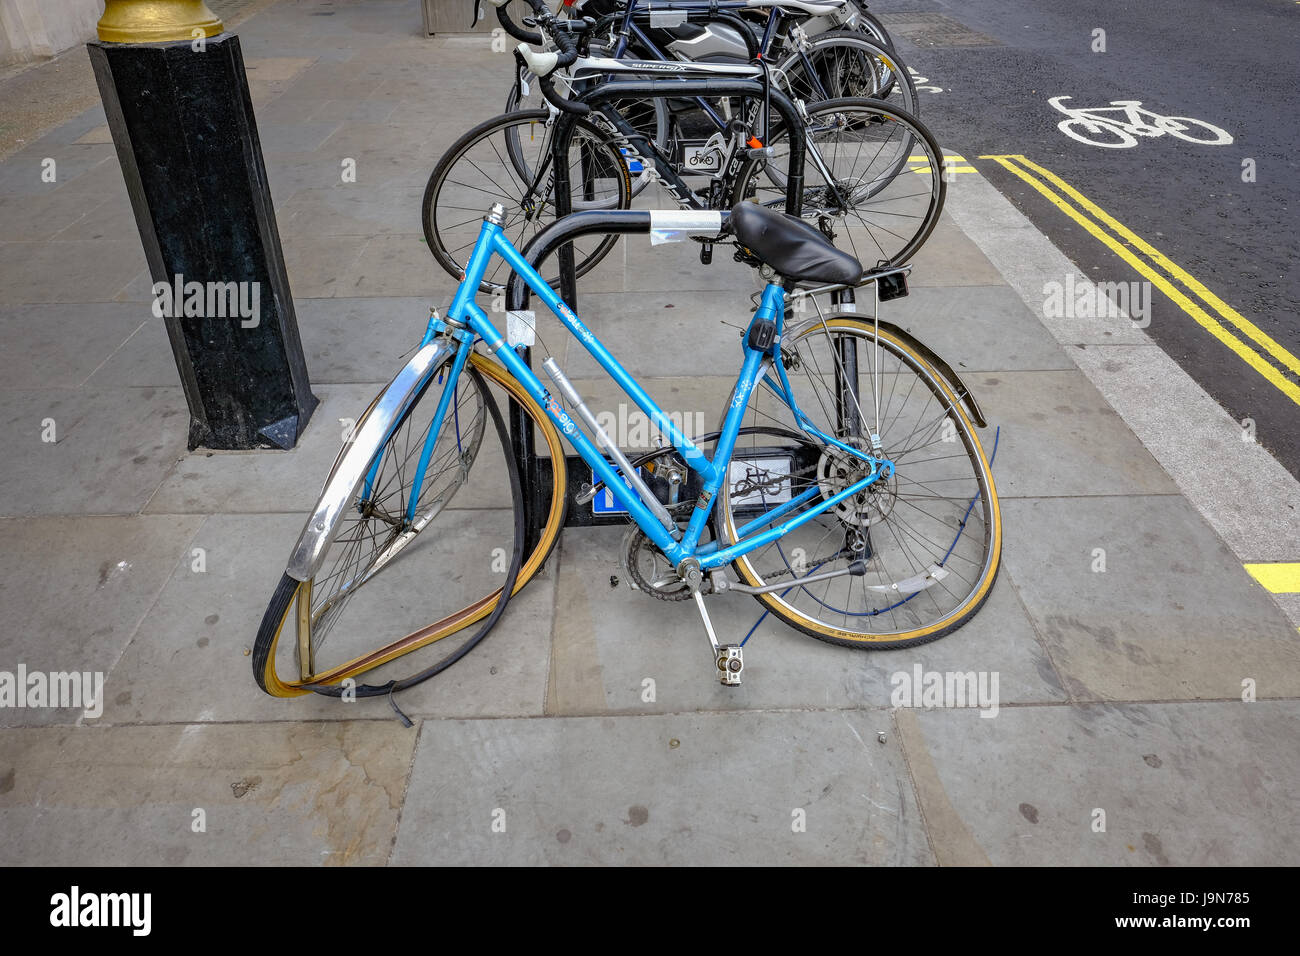 London UK - May 11, 2017:  Broken and crushed blue bicycle Stock Photo